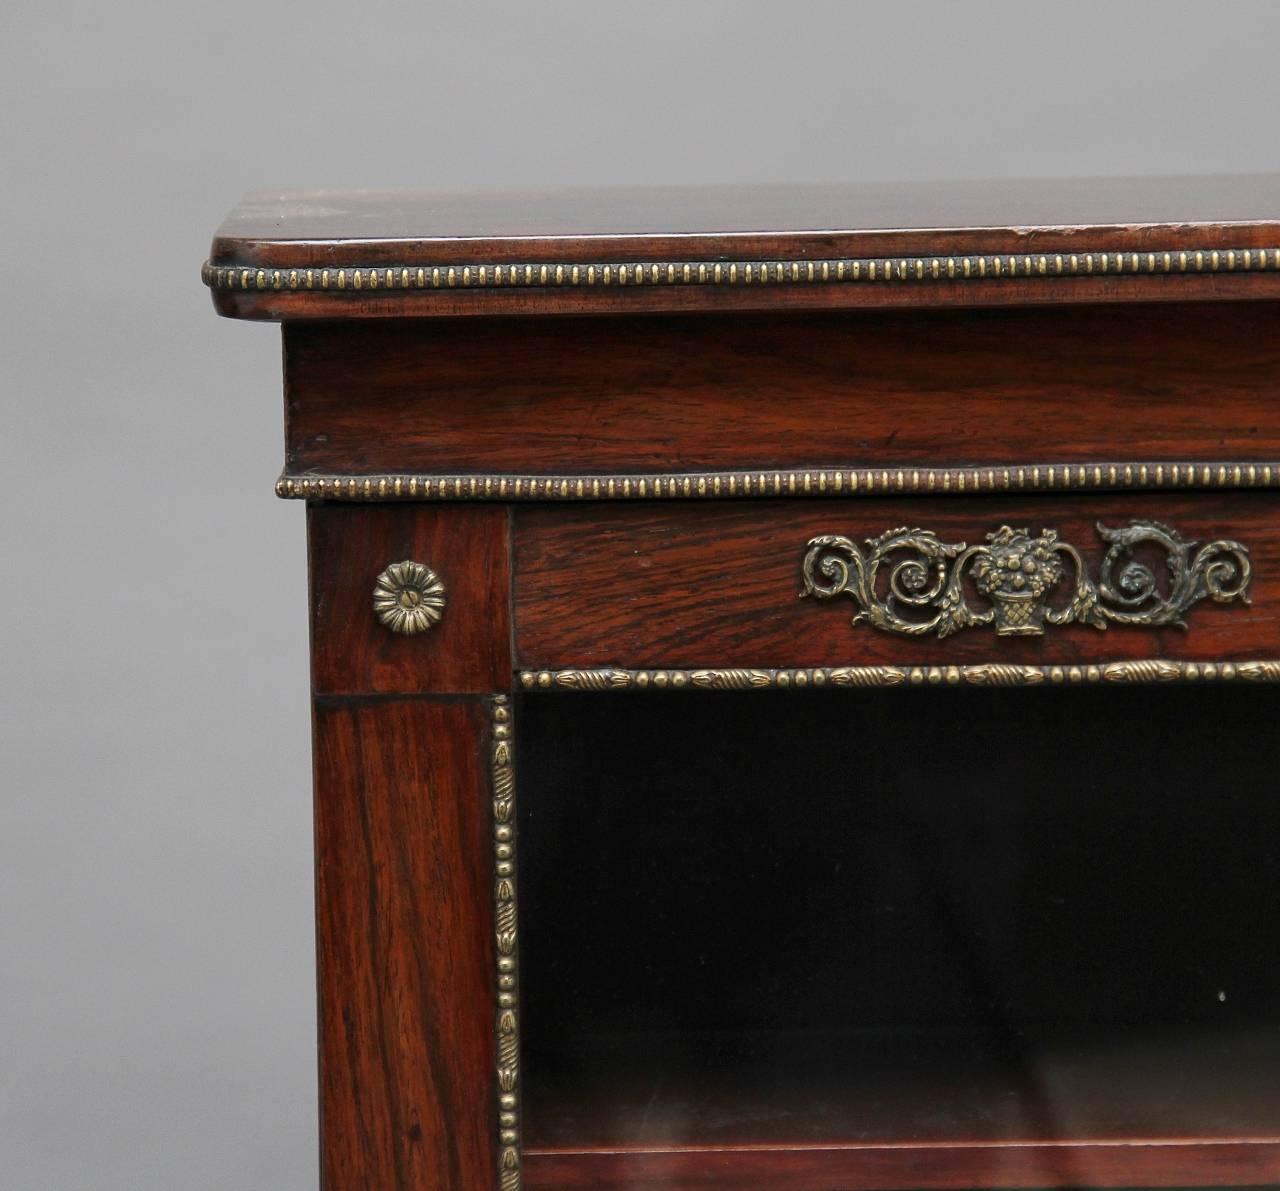 Regency 19th Century Rosewood and Ormolu Bookcase